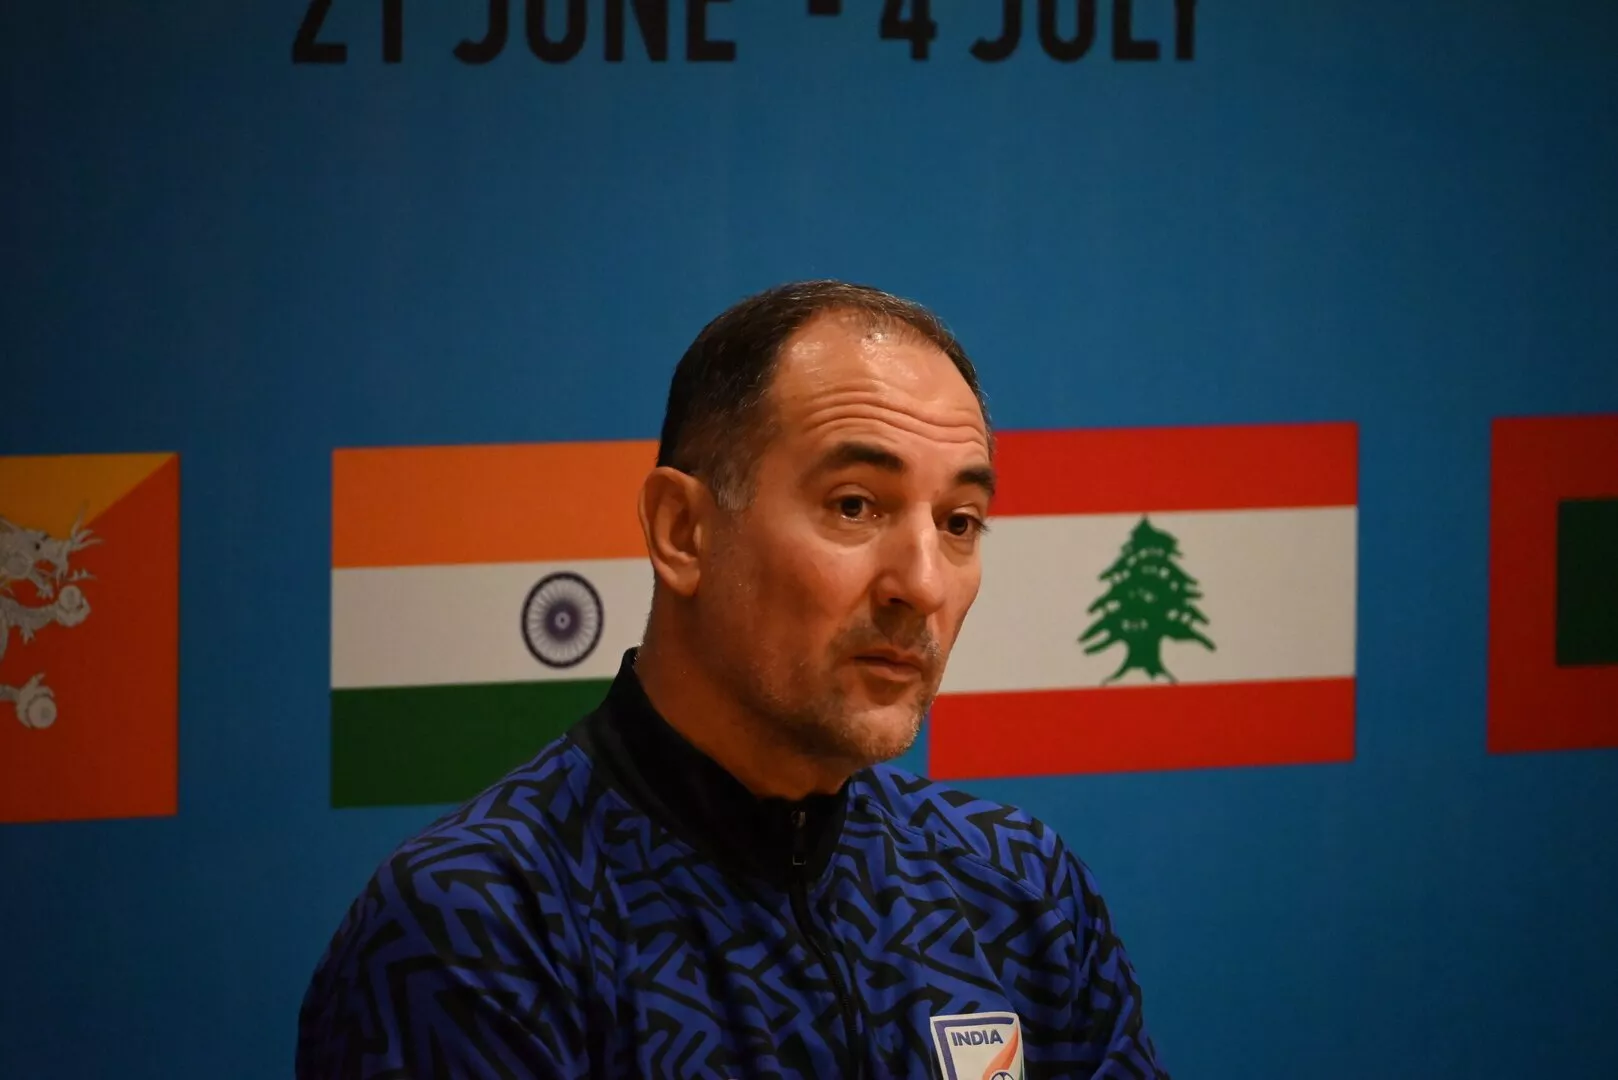 Igor Stimac to Bosnia? Or does he stay with India?